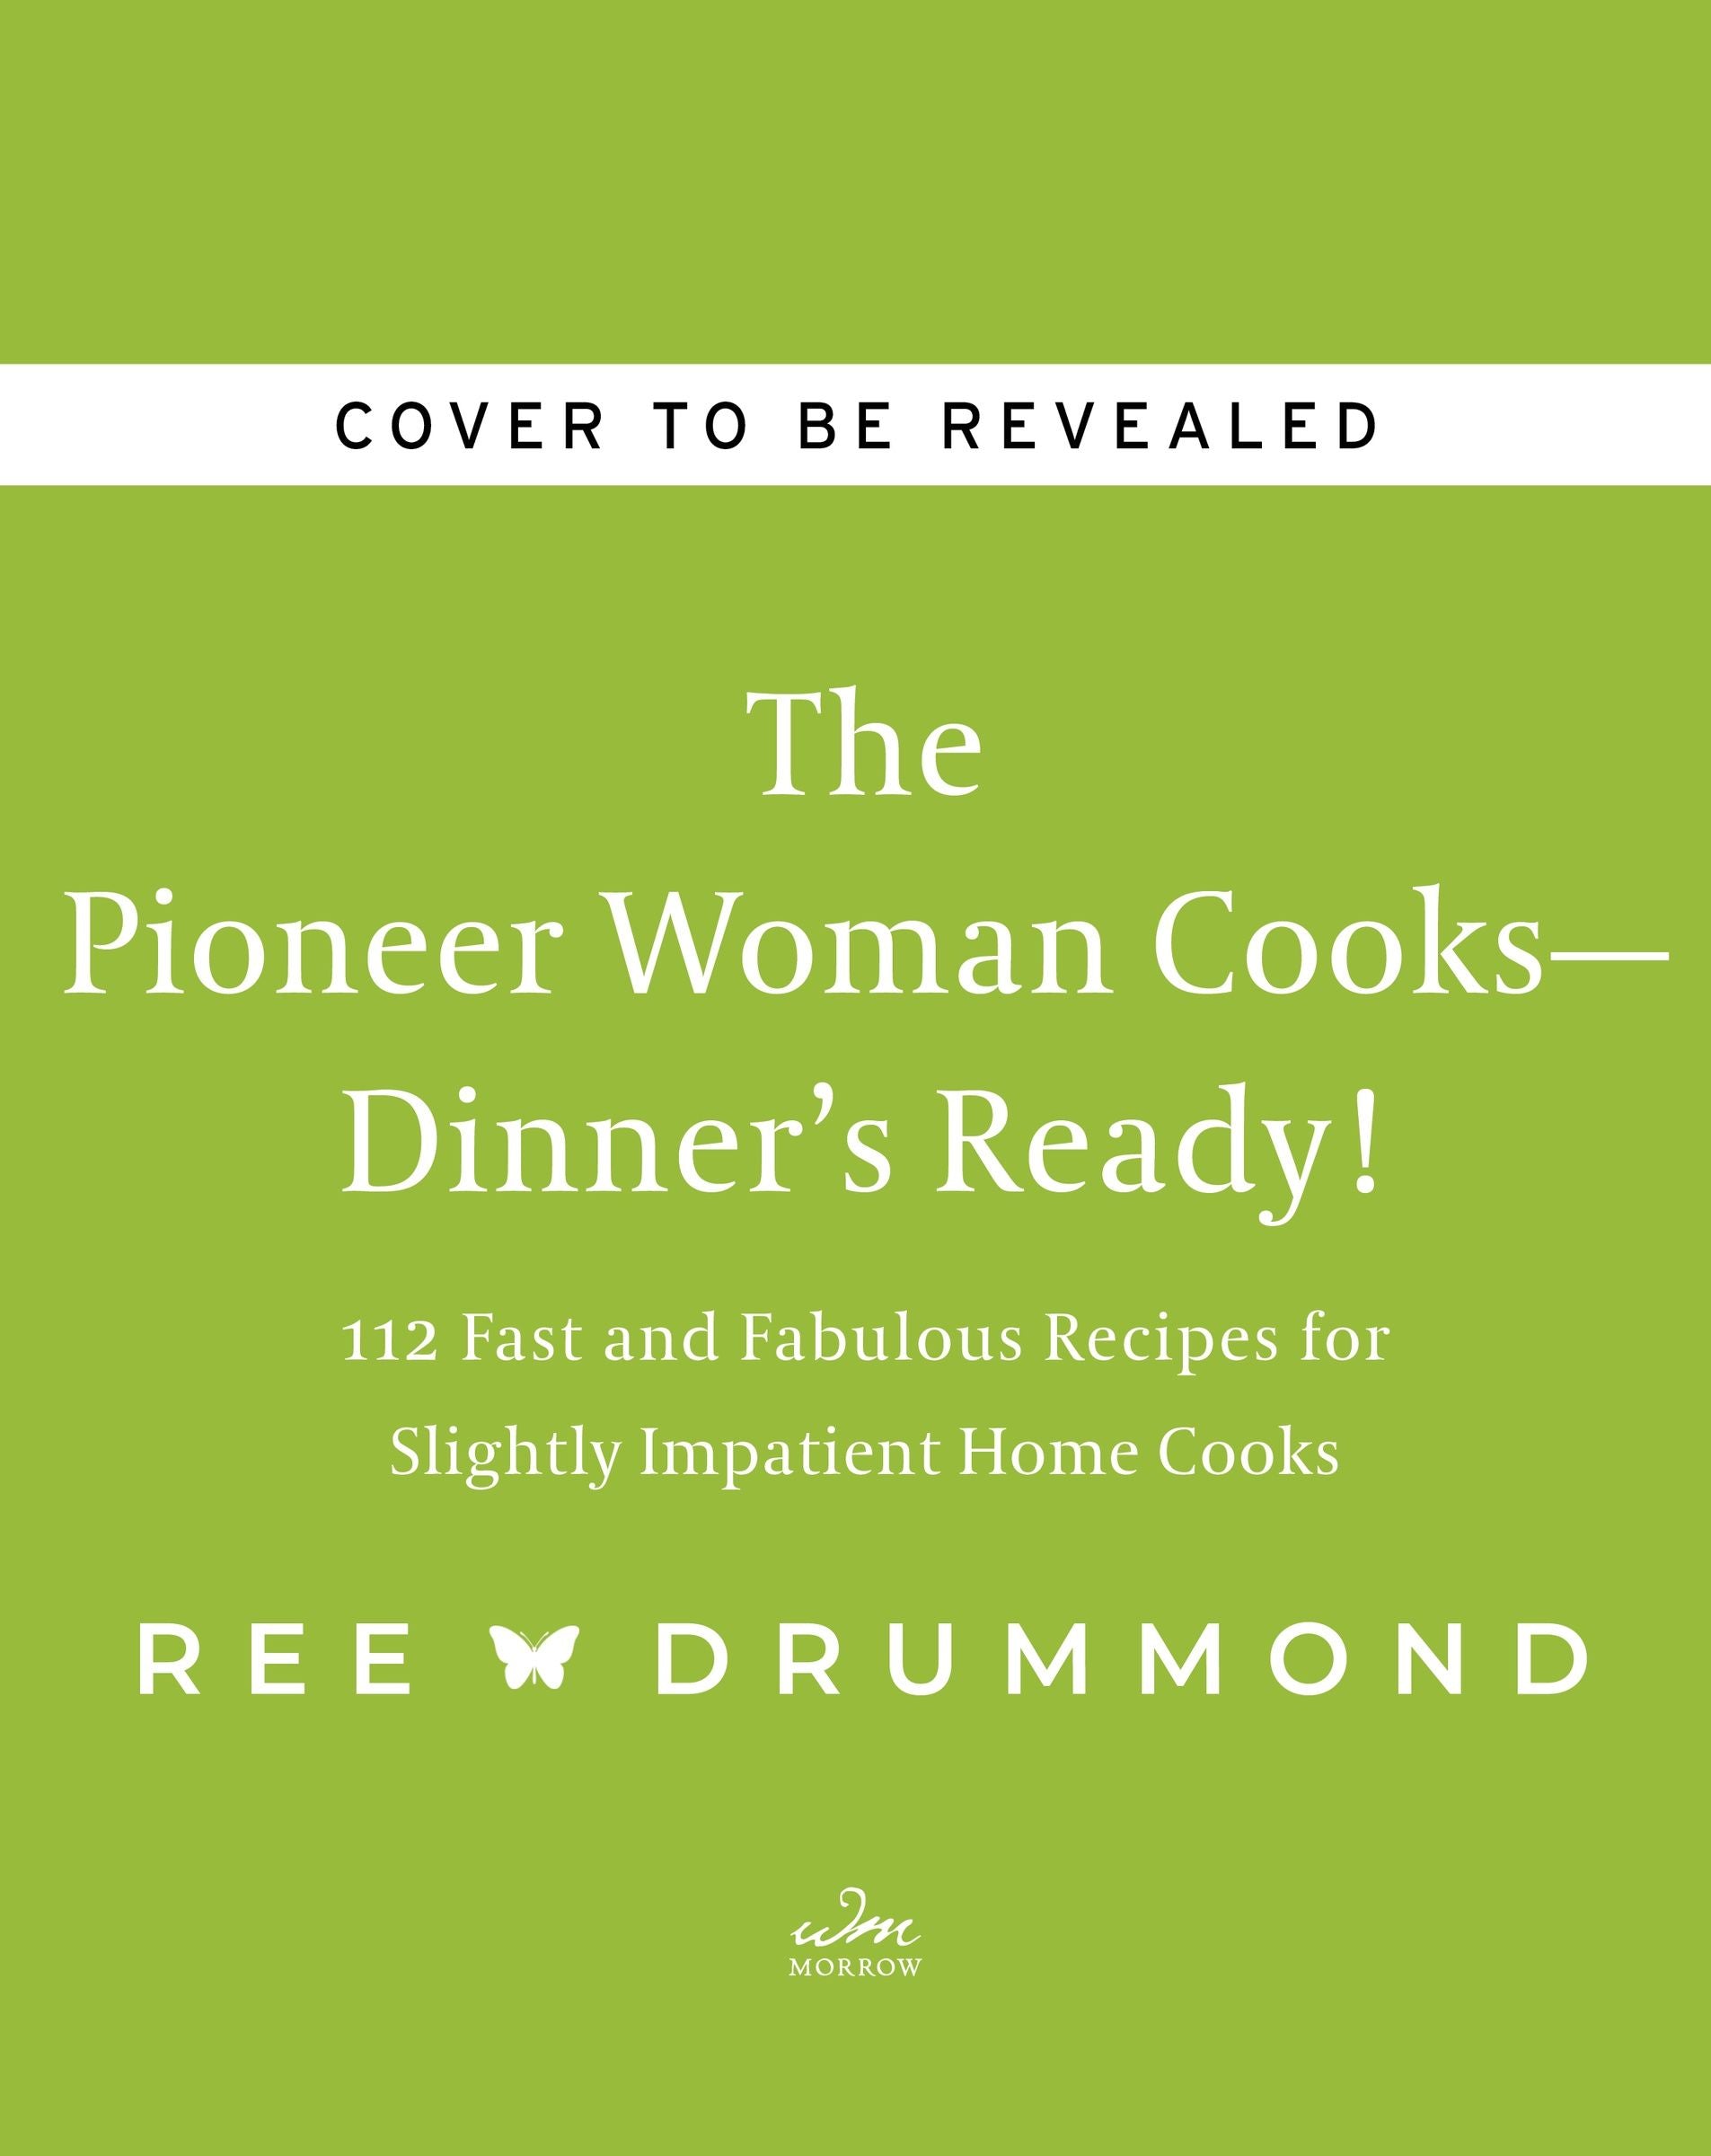 The Pioneer Woman Cooks--Dinner's Ready!: 112 Fast and Fabulous Recipes for Slightly Impatient Home Cooks [Book]